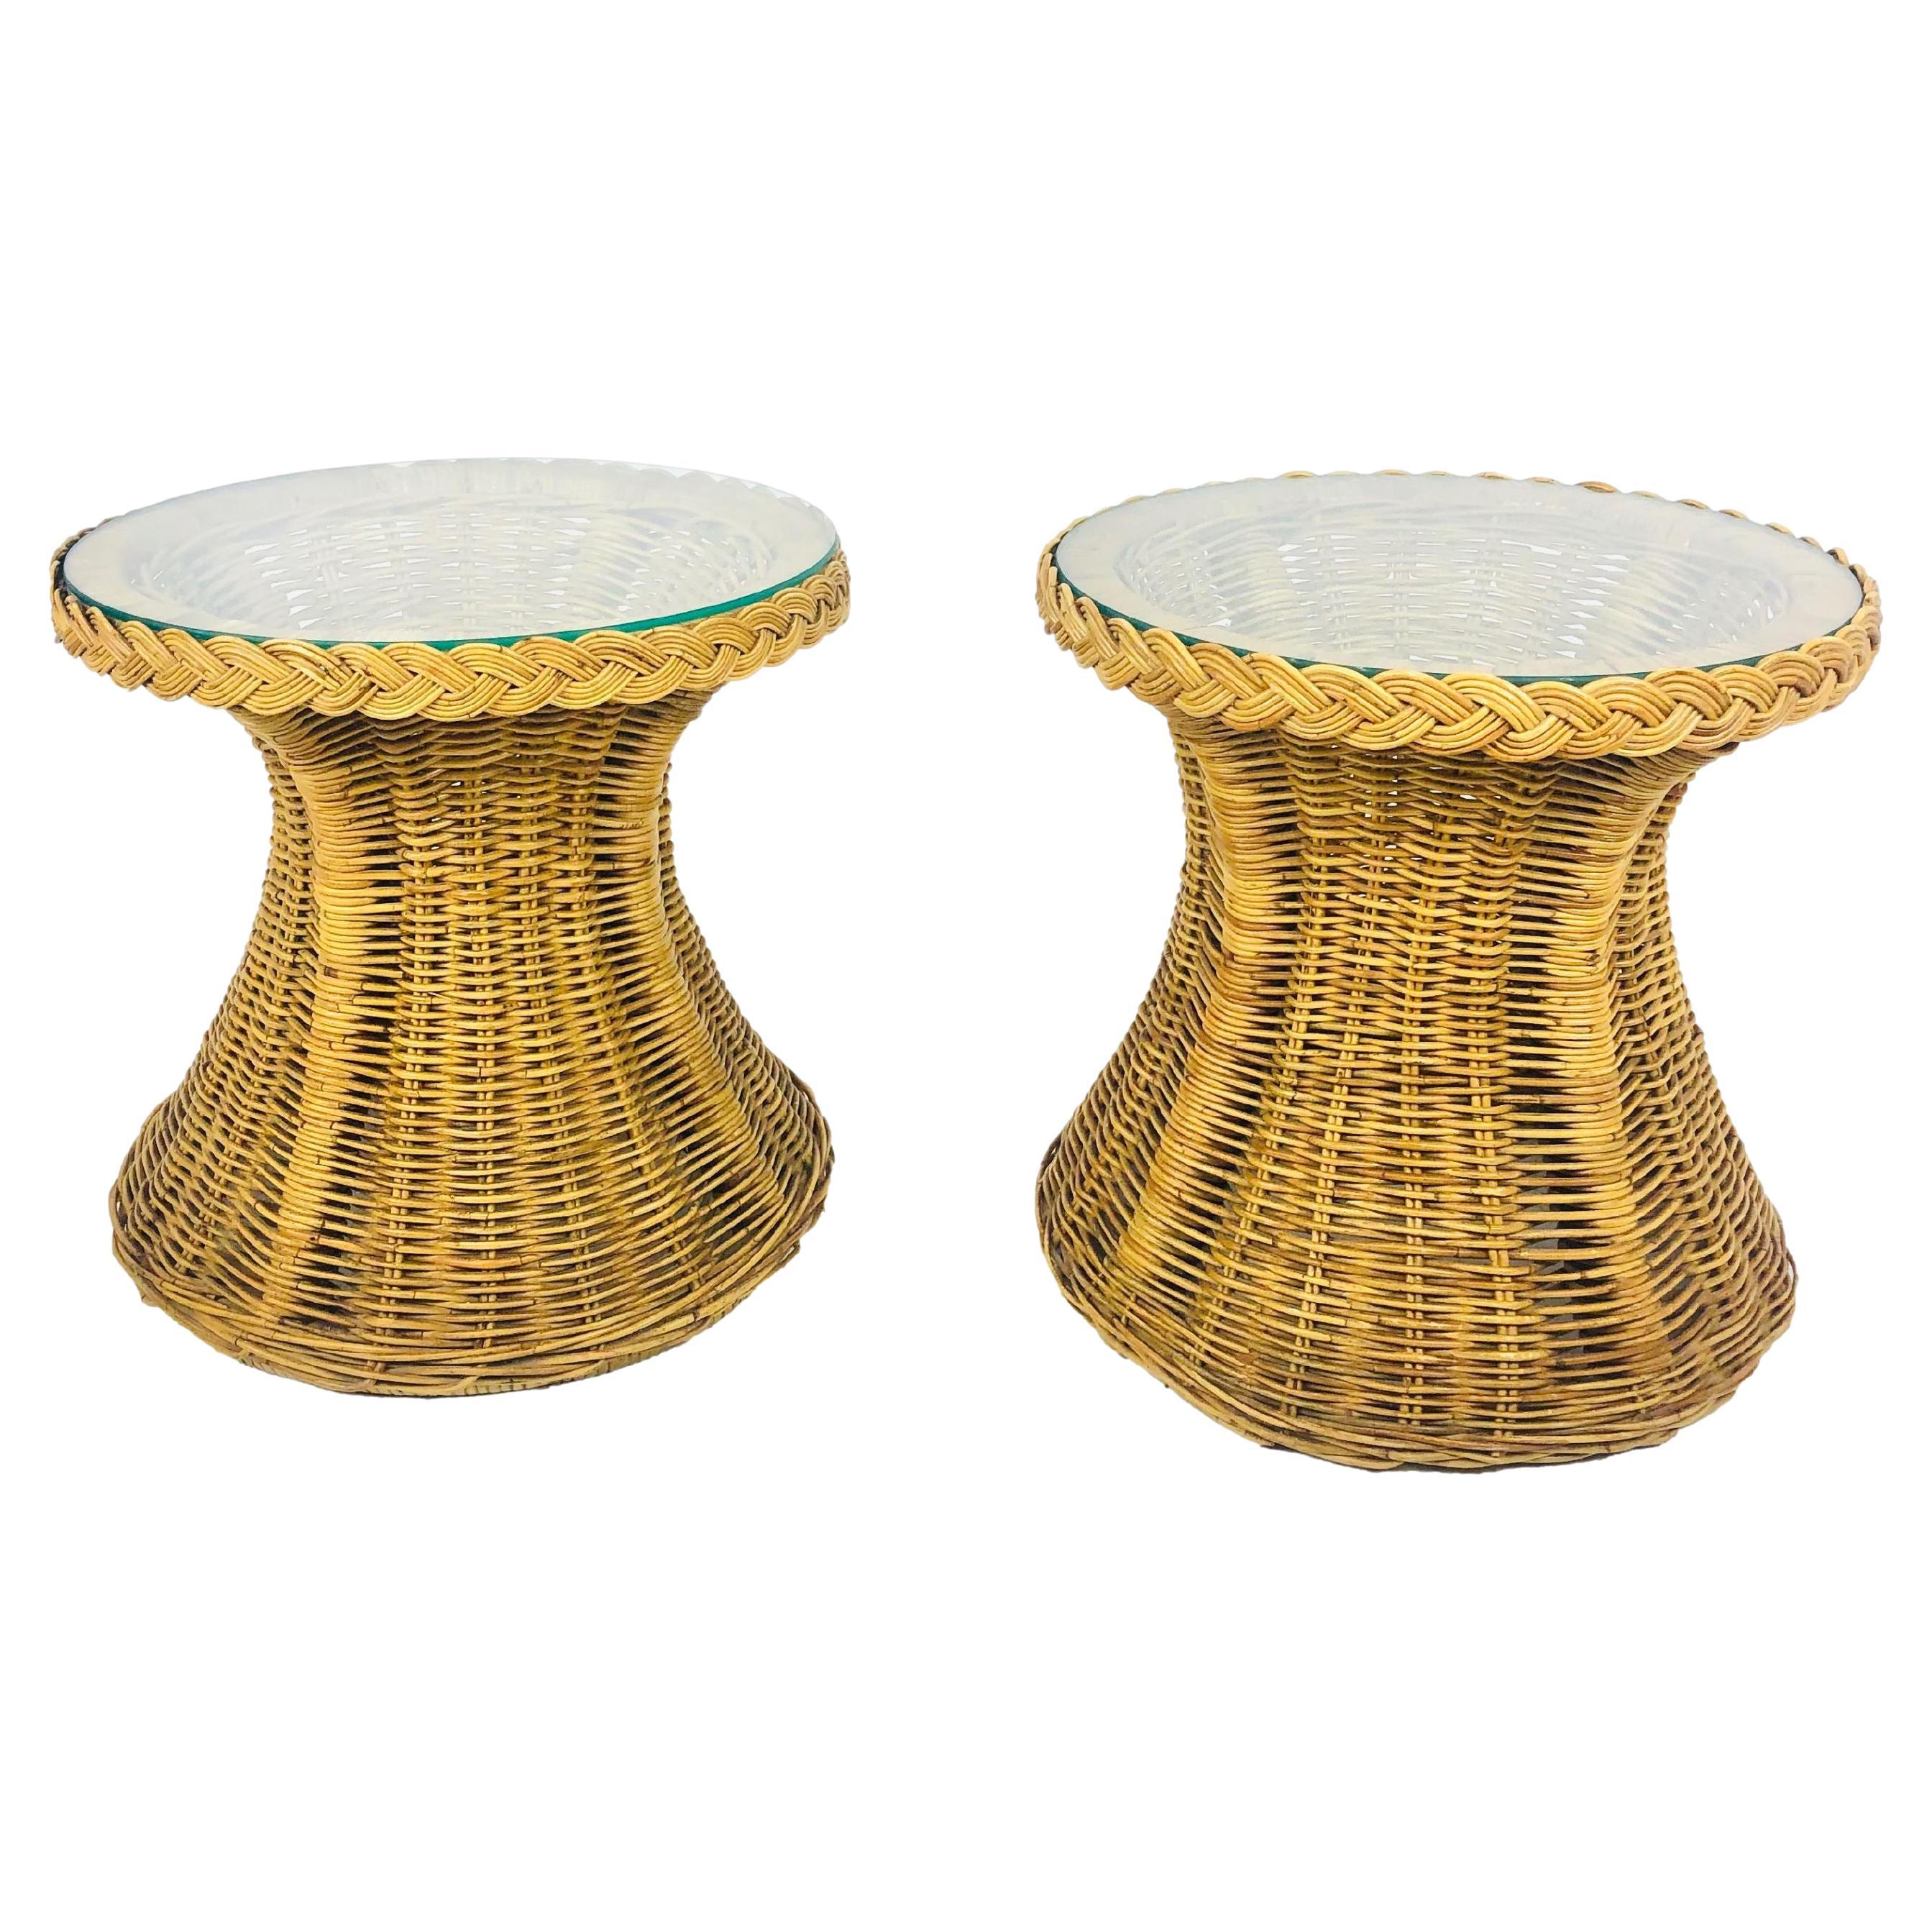 Pair of Braided Side Tables by Wicker Works